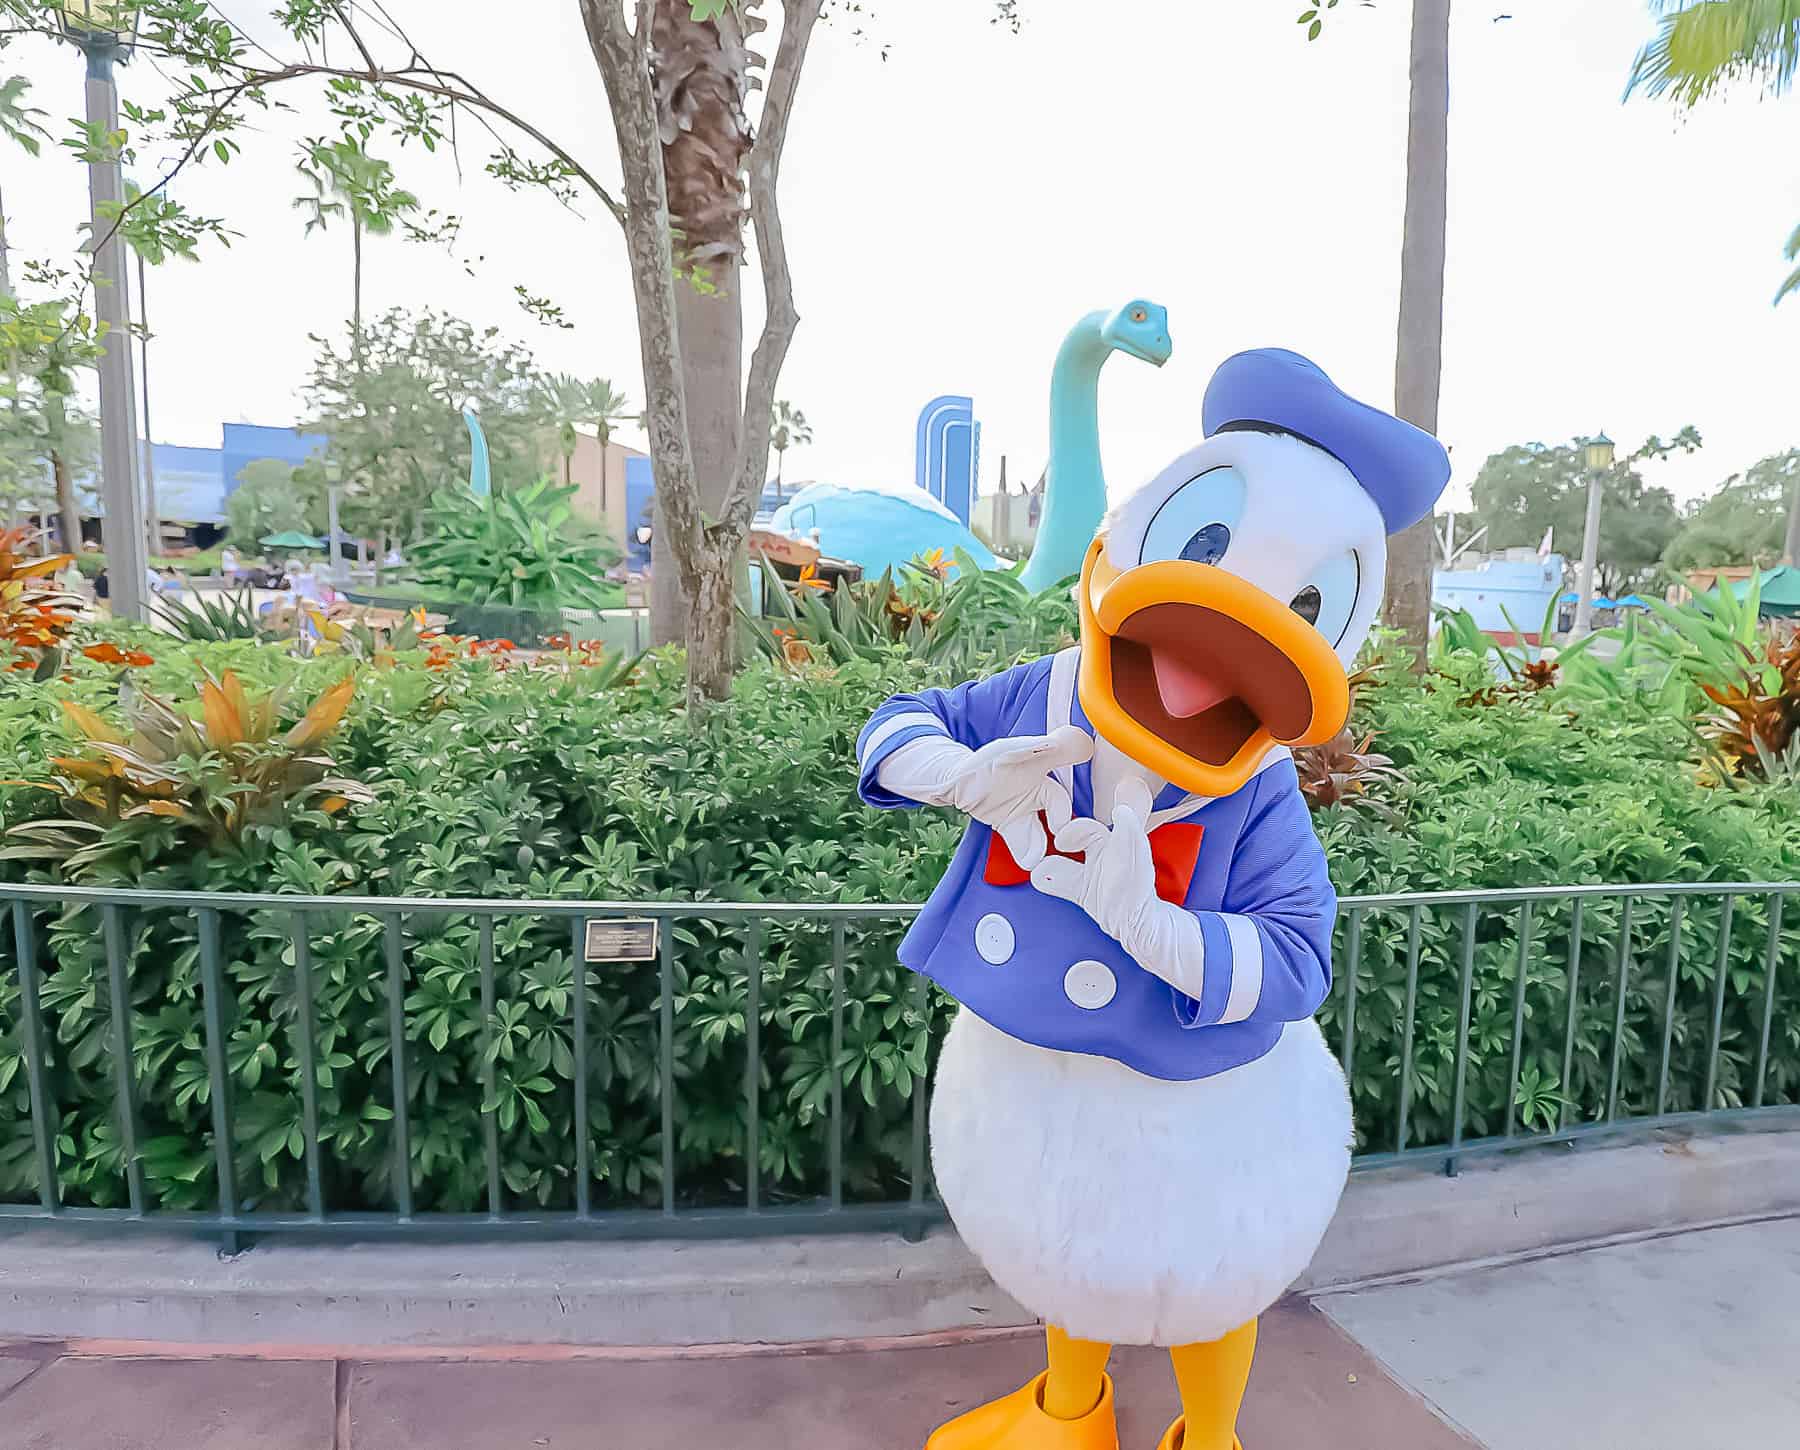 Donald Duck making a heart sign with his hands. 